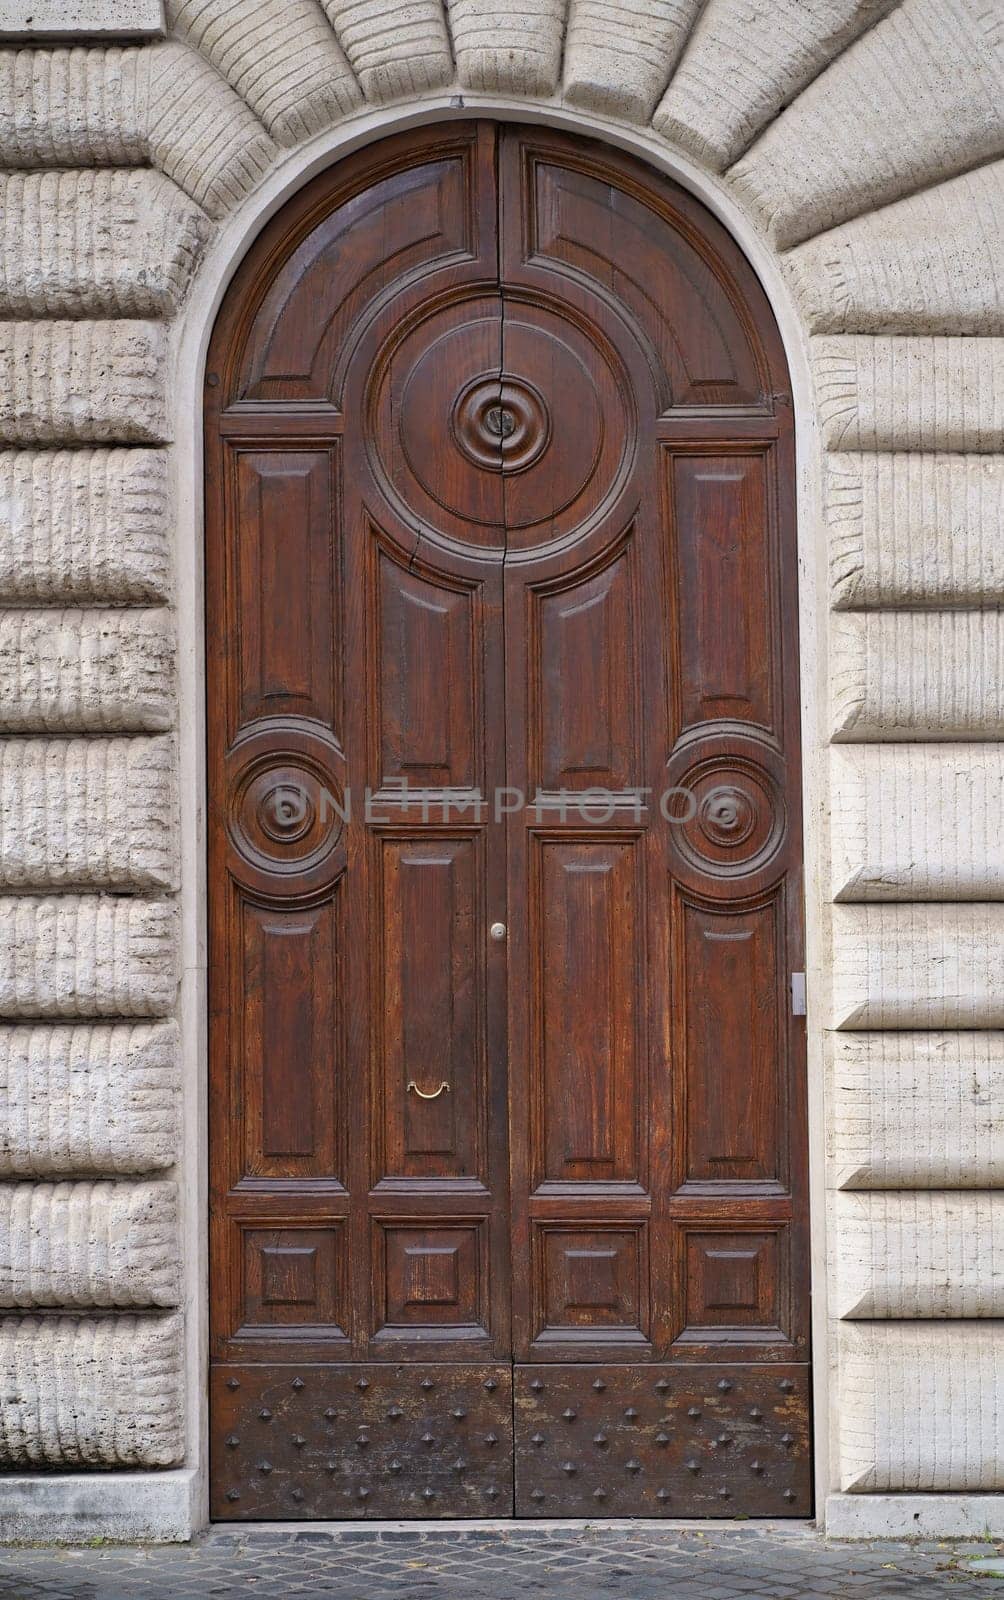 doors of Rome. Classic old wooden door in a public place on a city street or in an urban environment by aprilphoto